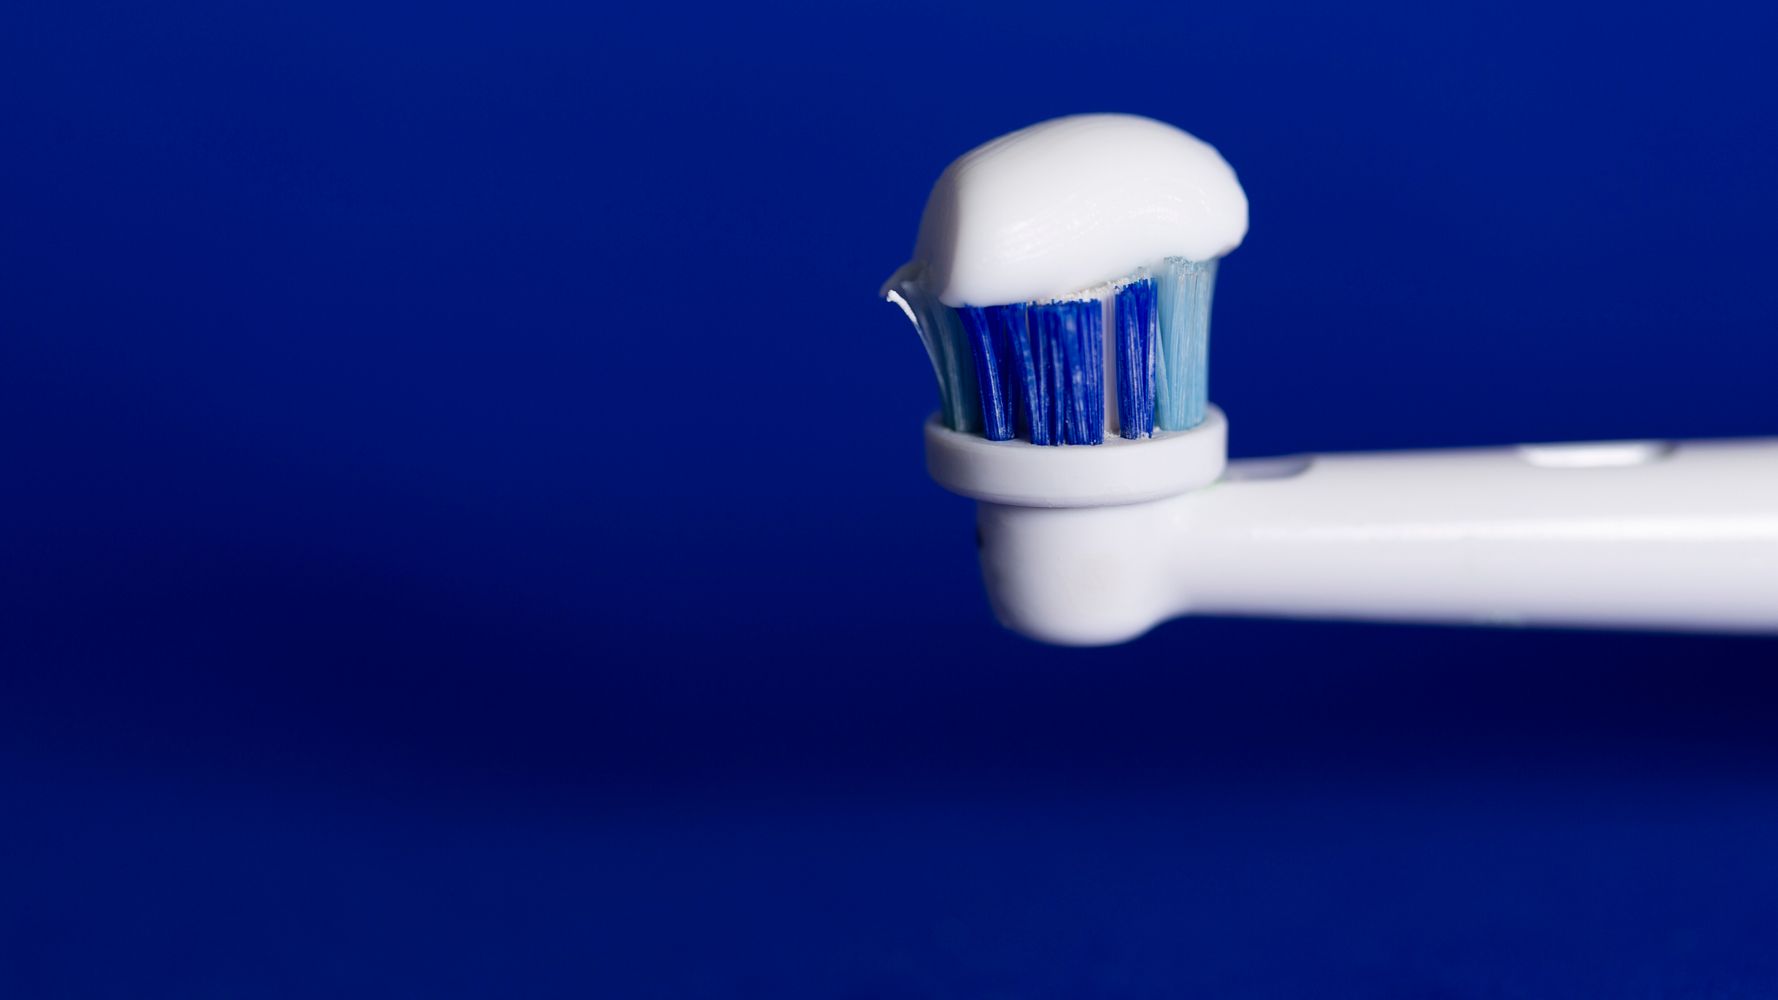 Oh Good – We're All Using Our Electric Toothbrushes Wrong